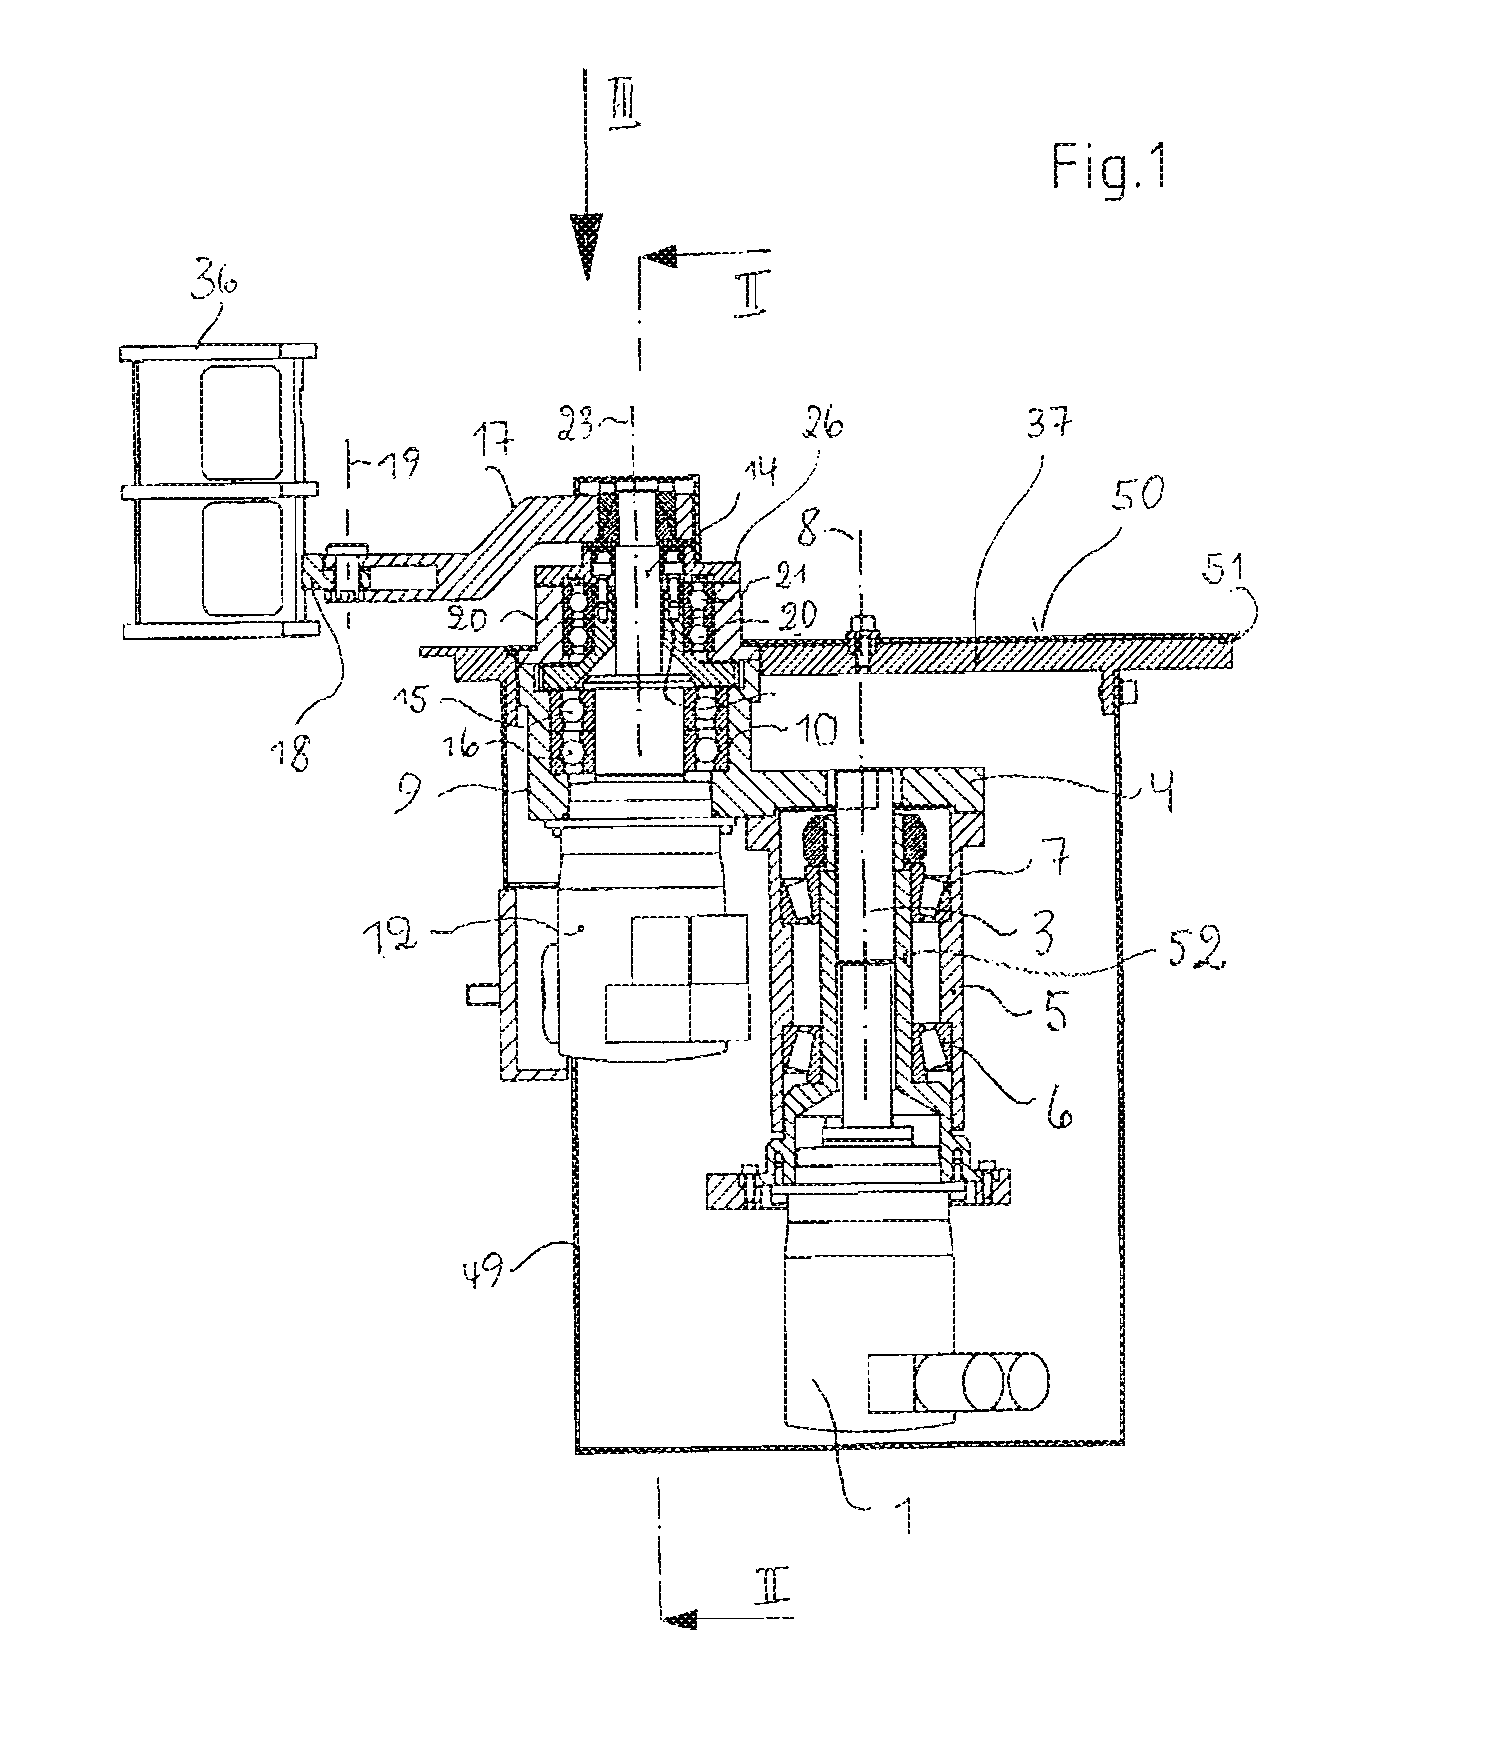 Device for pushing glass objects onto a conveyor belt